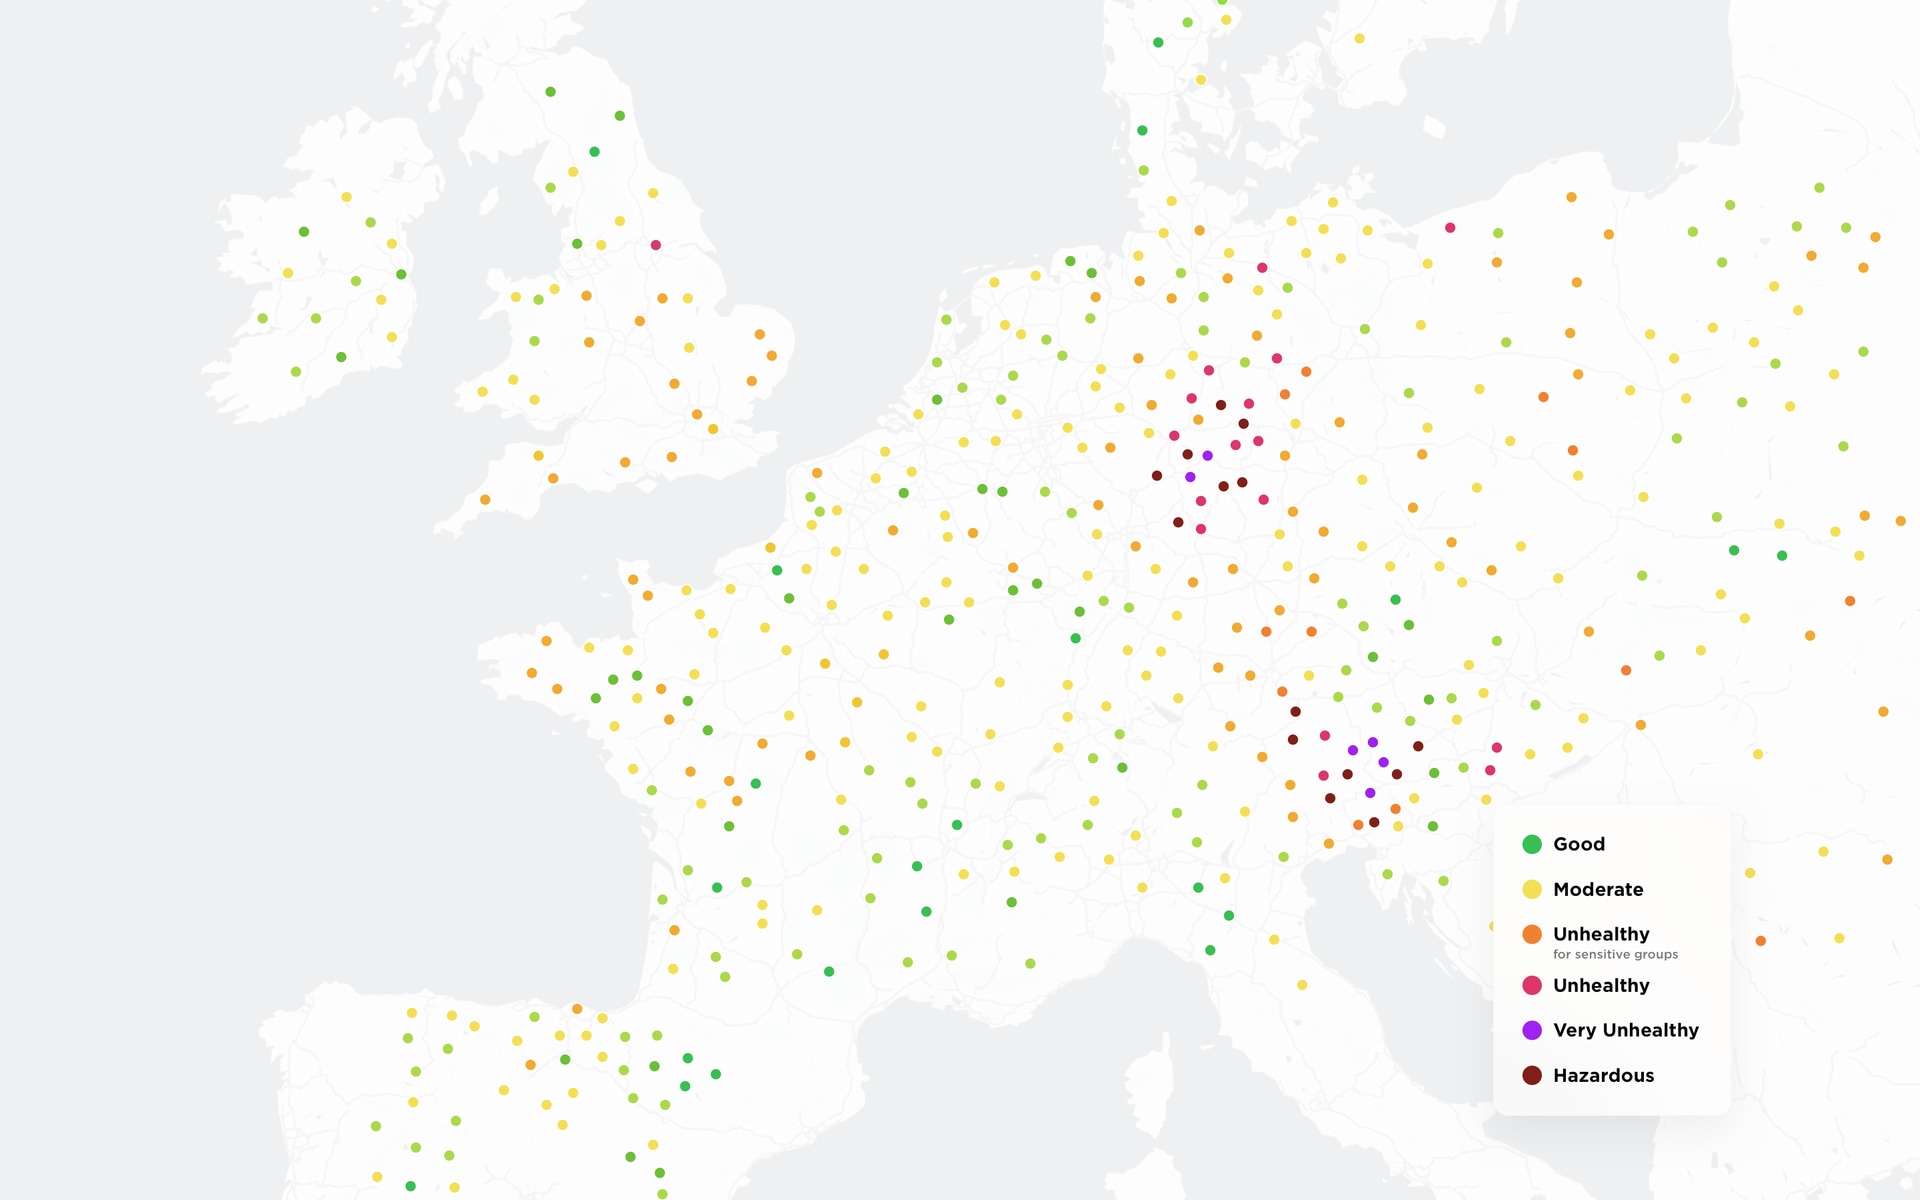 Colorful map showing levels of pollution in different regions